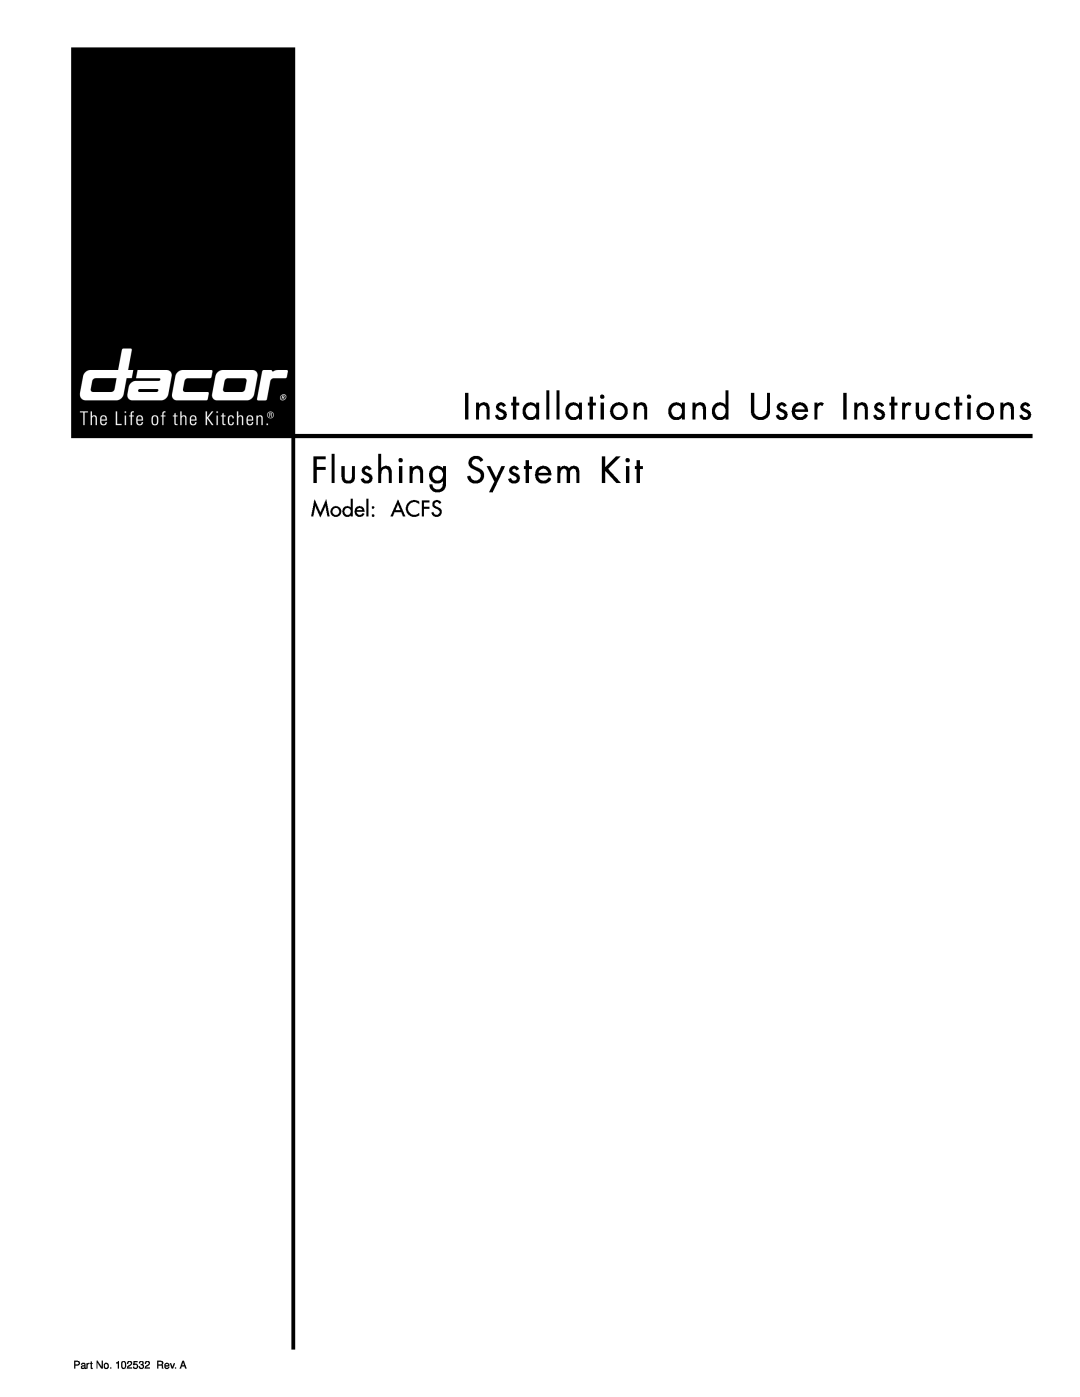 Dacor manual Installation and User Instructions Flushing System Kit, Model ACFS, Part No. 102532 Rev. A 